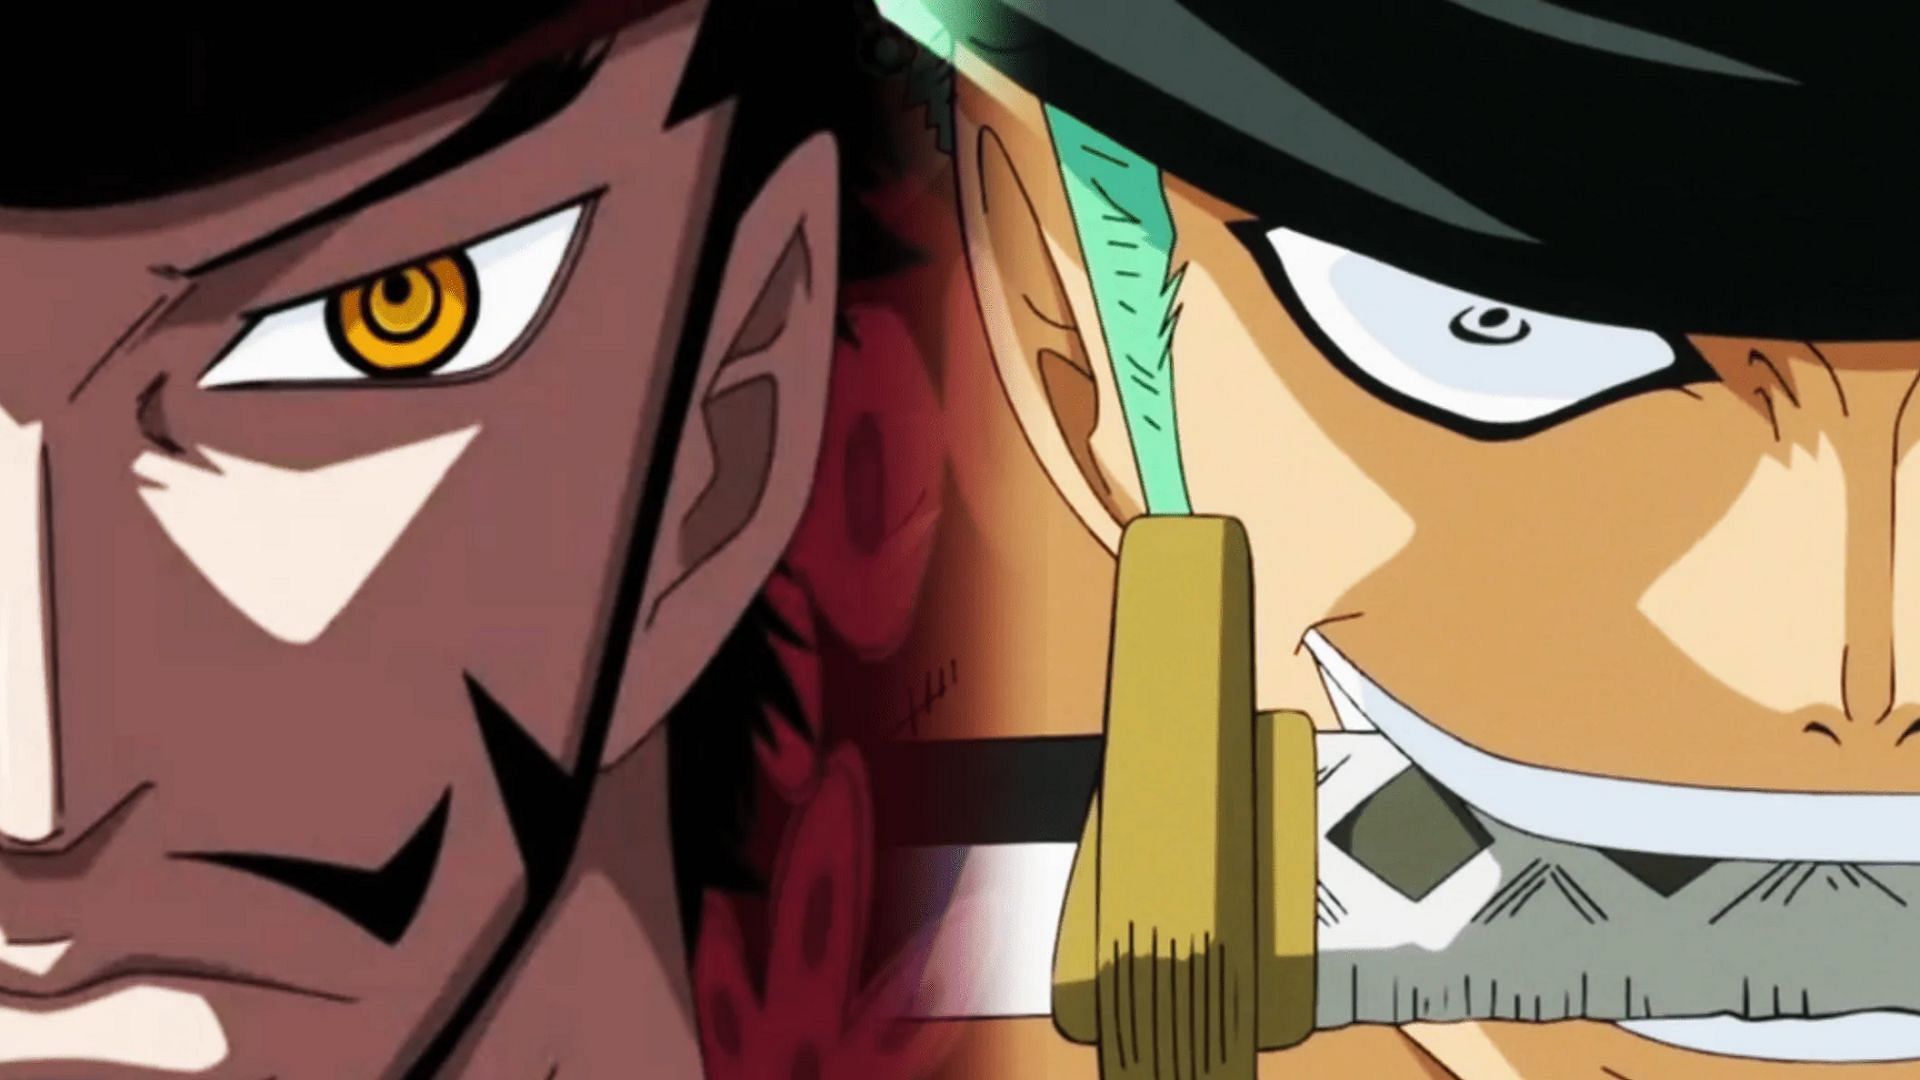 The fight between Mihawk and Zoro will be among One Piece's most amazing moments (Image via Toei Animation, One Piece)